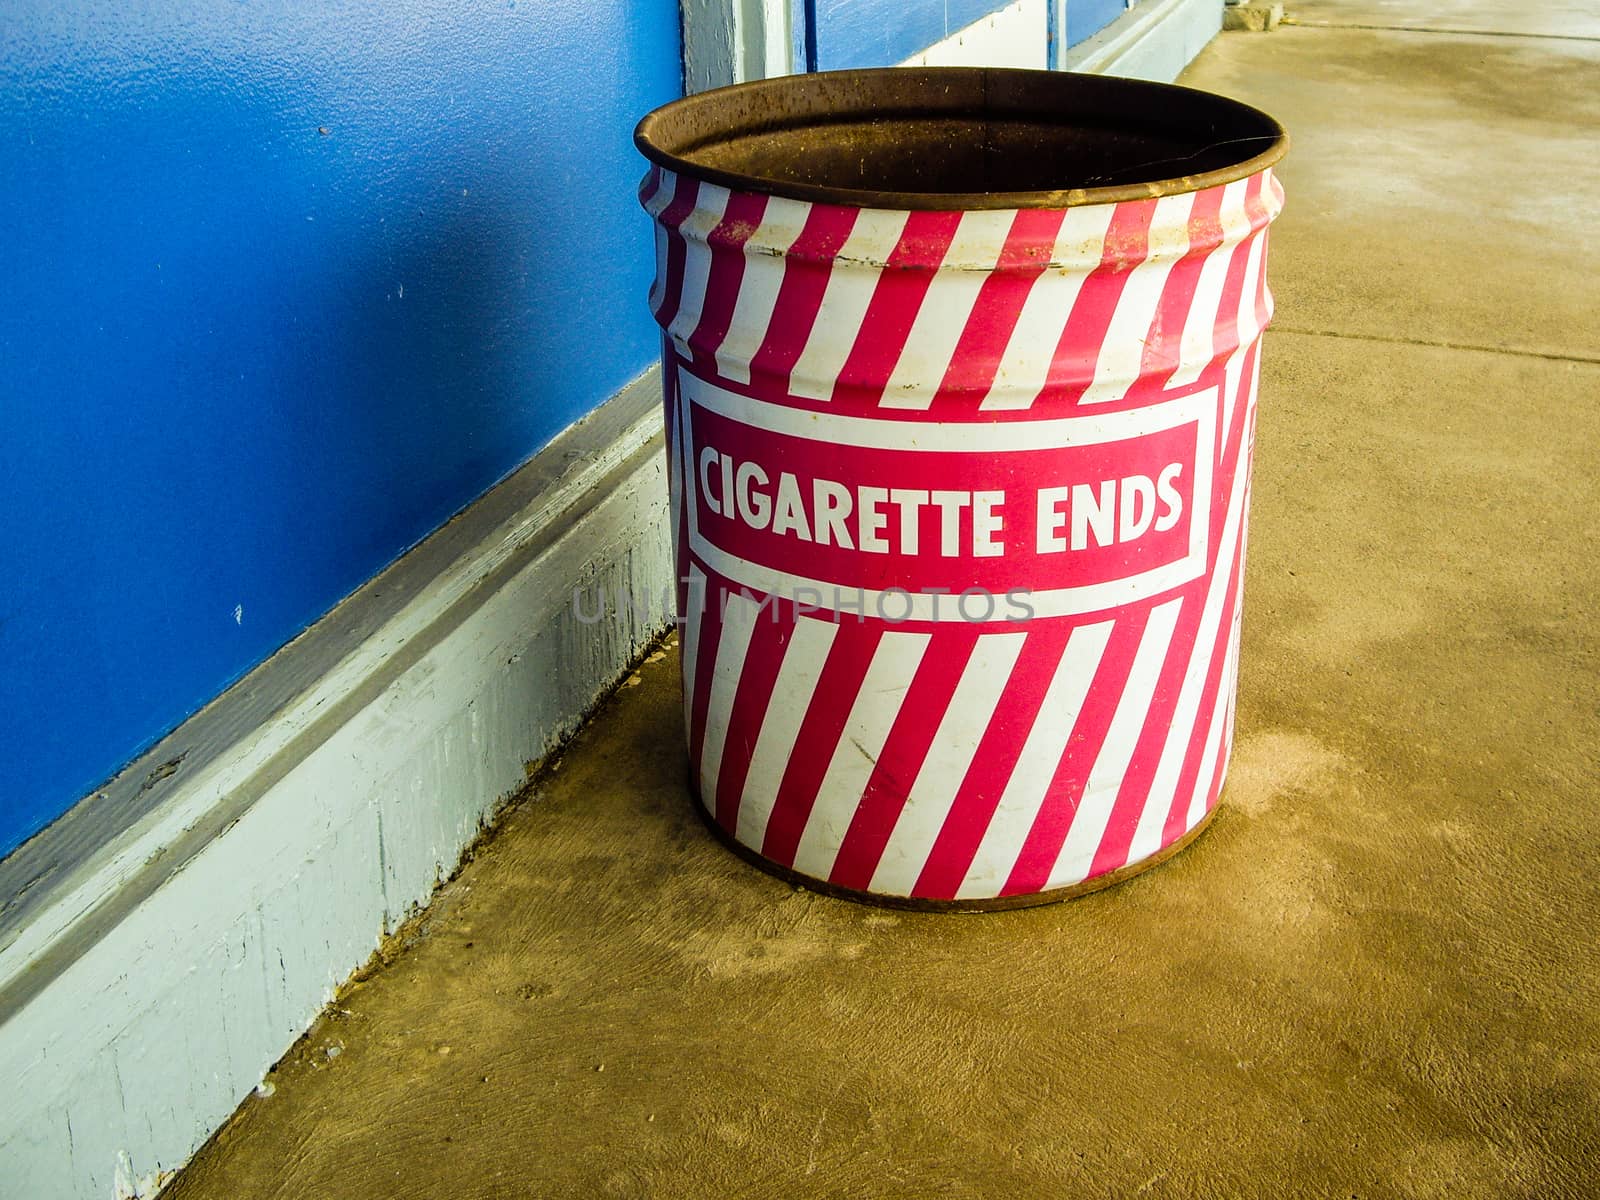 Can for cigarette disposal